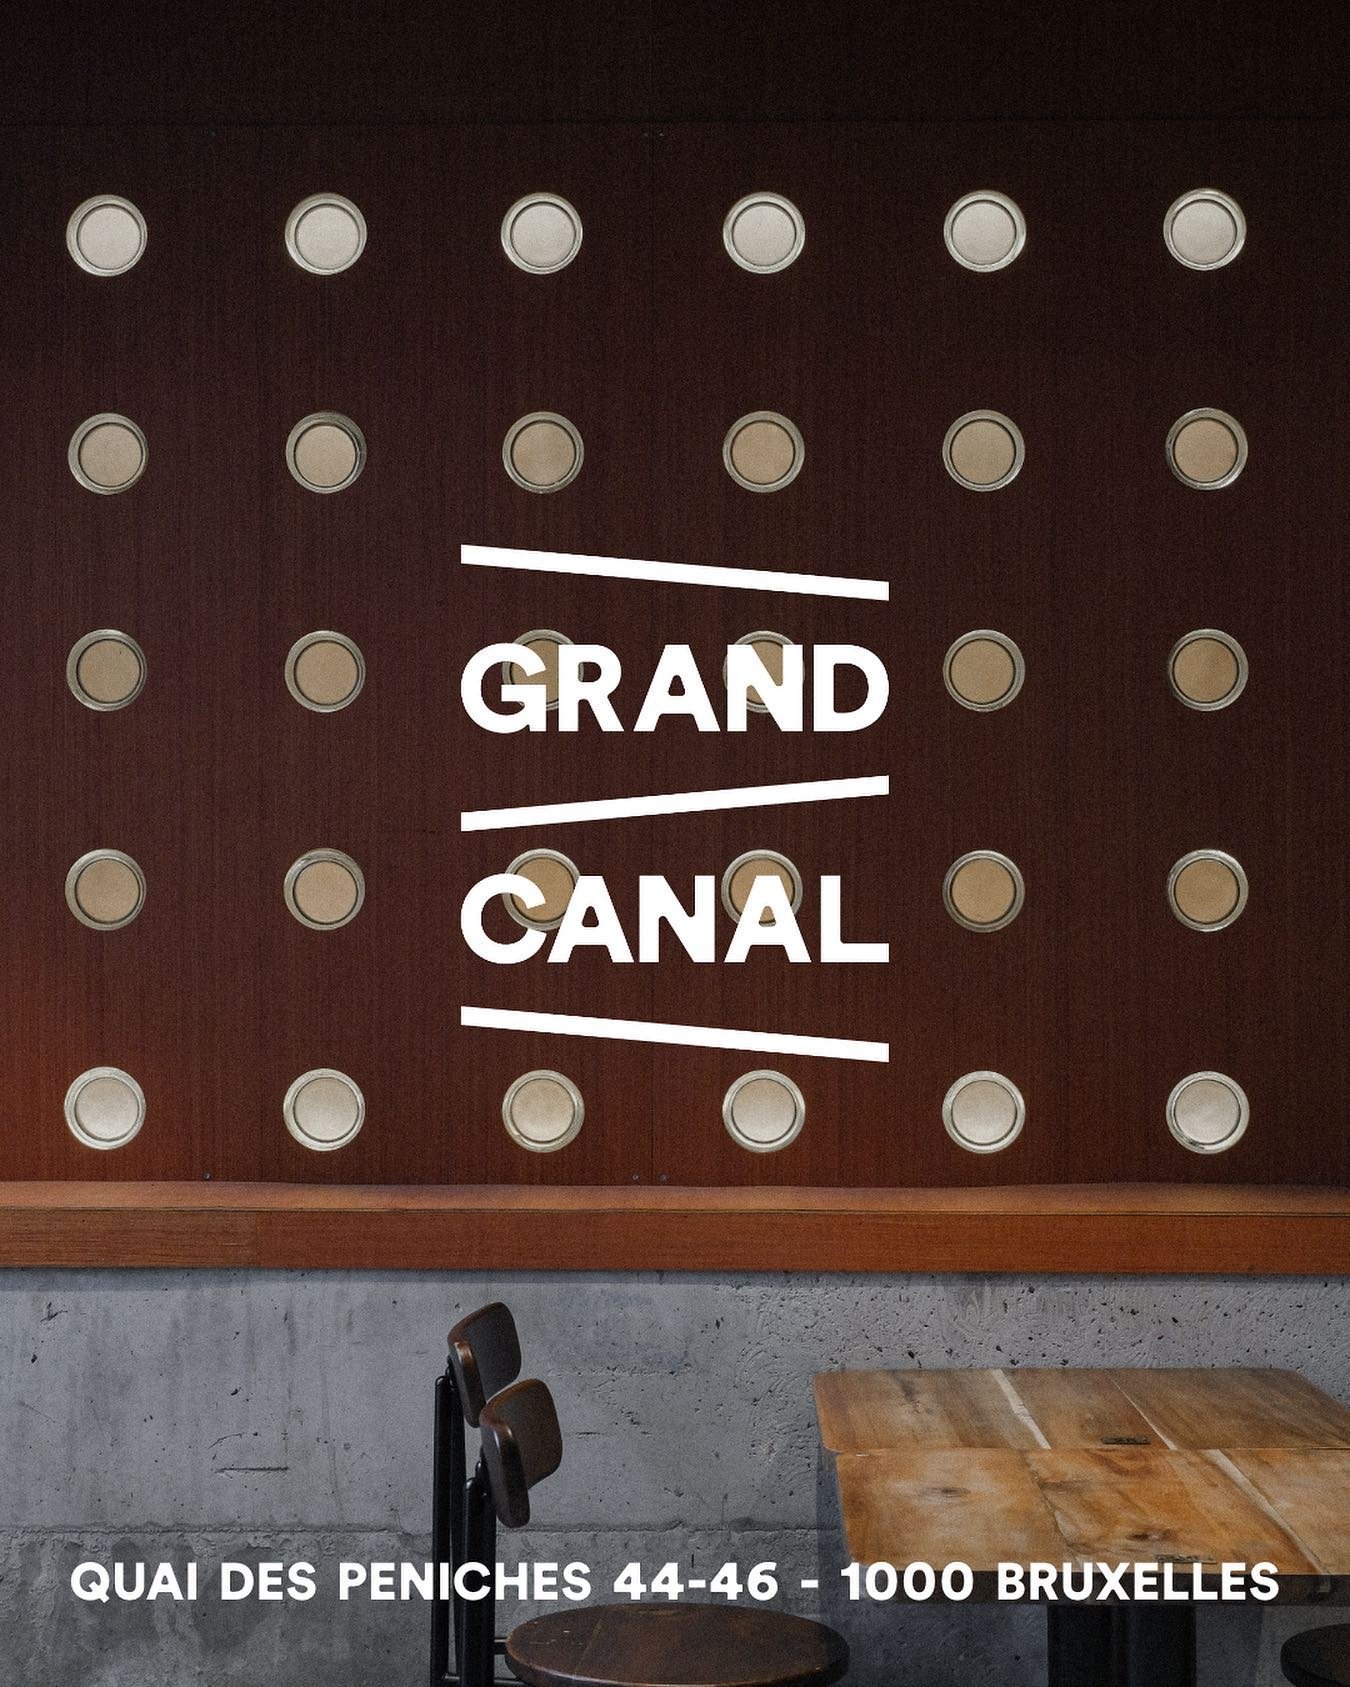 Pull up a chair and join us at Grand Canal ❤️&zwj;🔥

📍Grand Canal - Quai des p&eacute;niches 44B - 1000 Bruxelles

#GrandCanal #GrandCanalBxl #BrusselsFood #eateryvibes